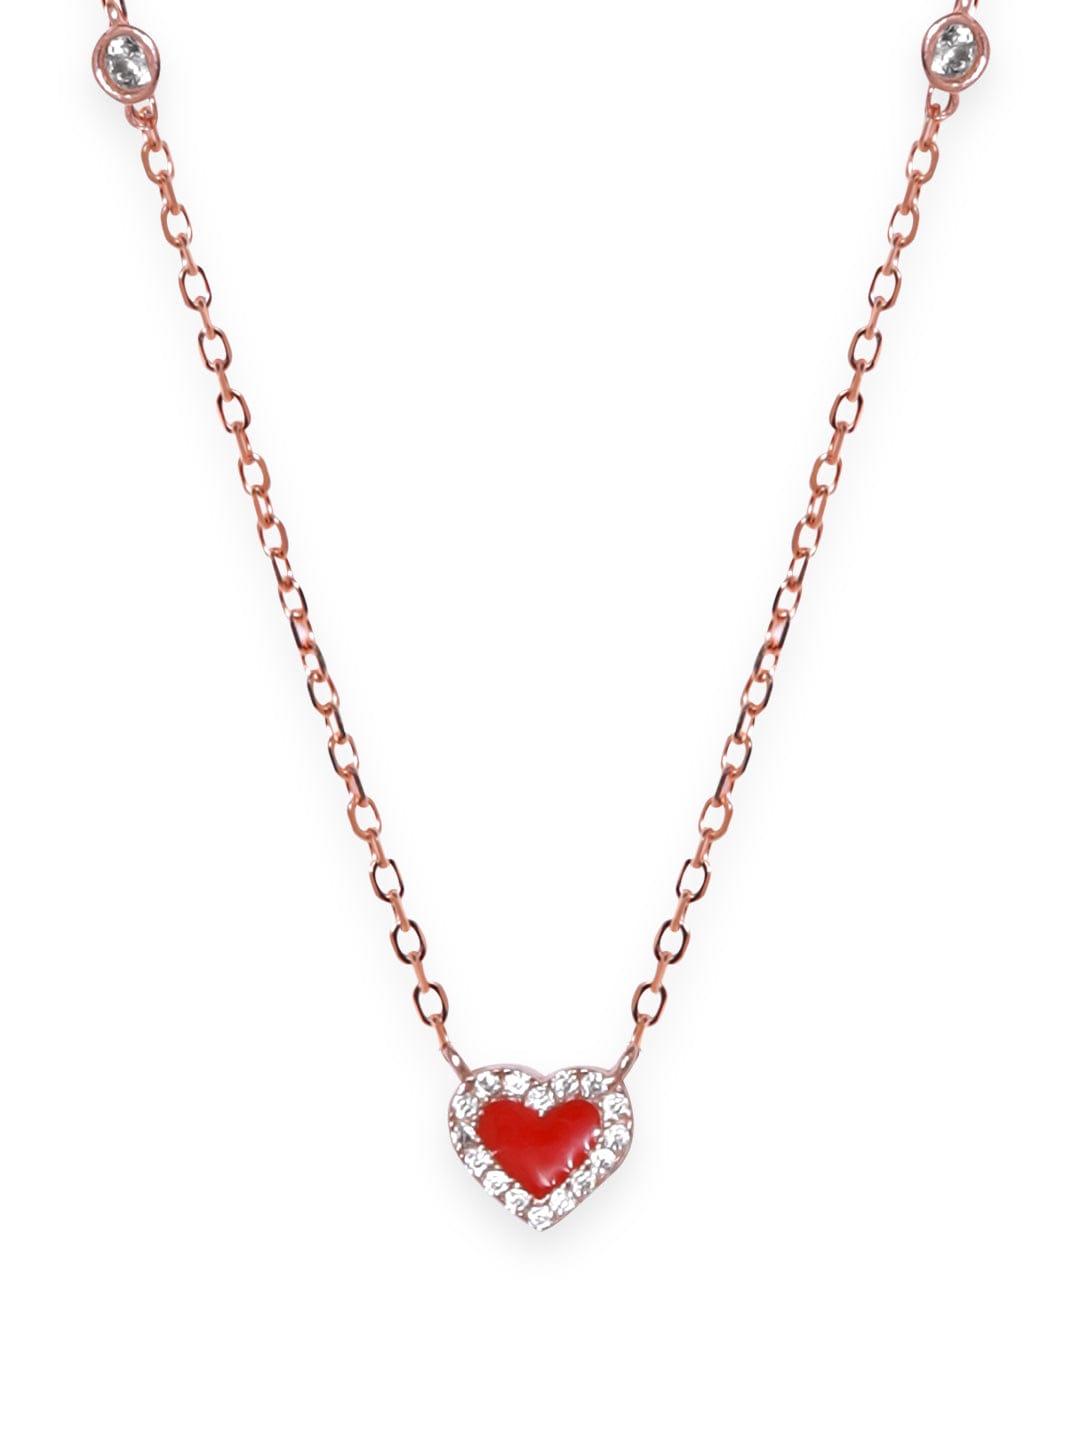 Rose gold BVLGARI BVLGARI Necklace Red,White with 0.11 ct Diamonds,Mother  of Pearl,Carnelian | Bulgari Official Store